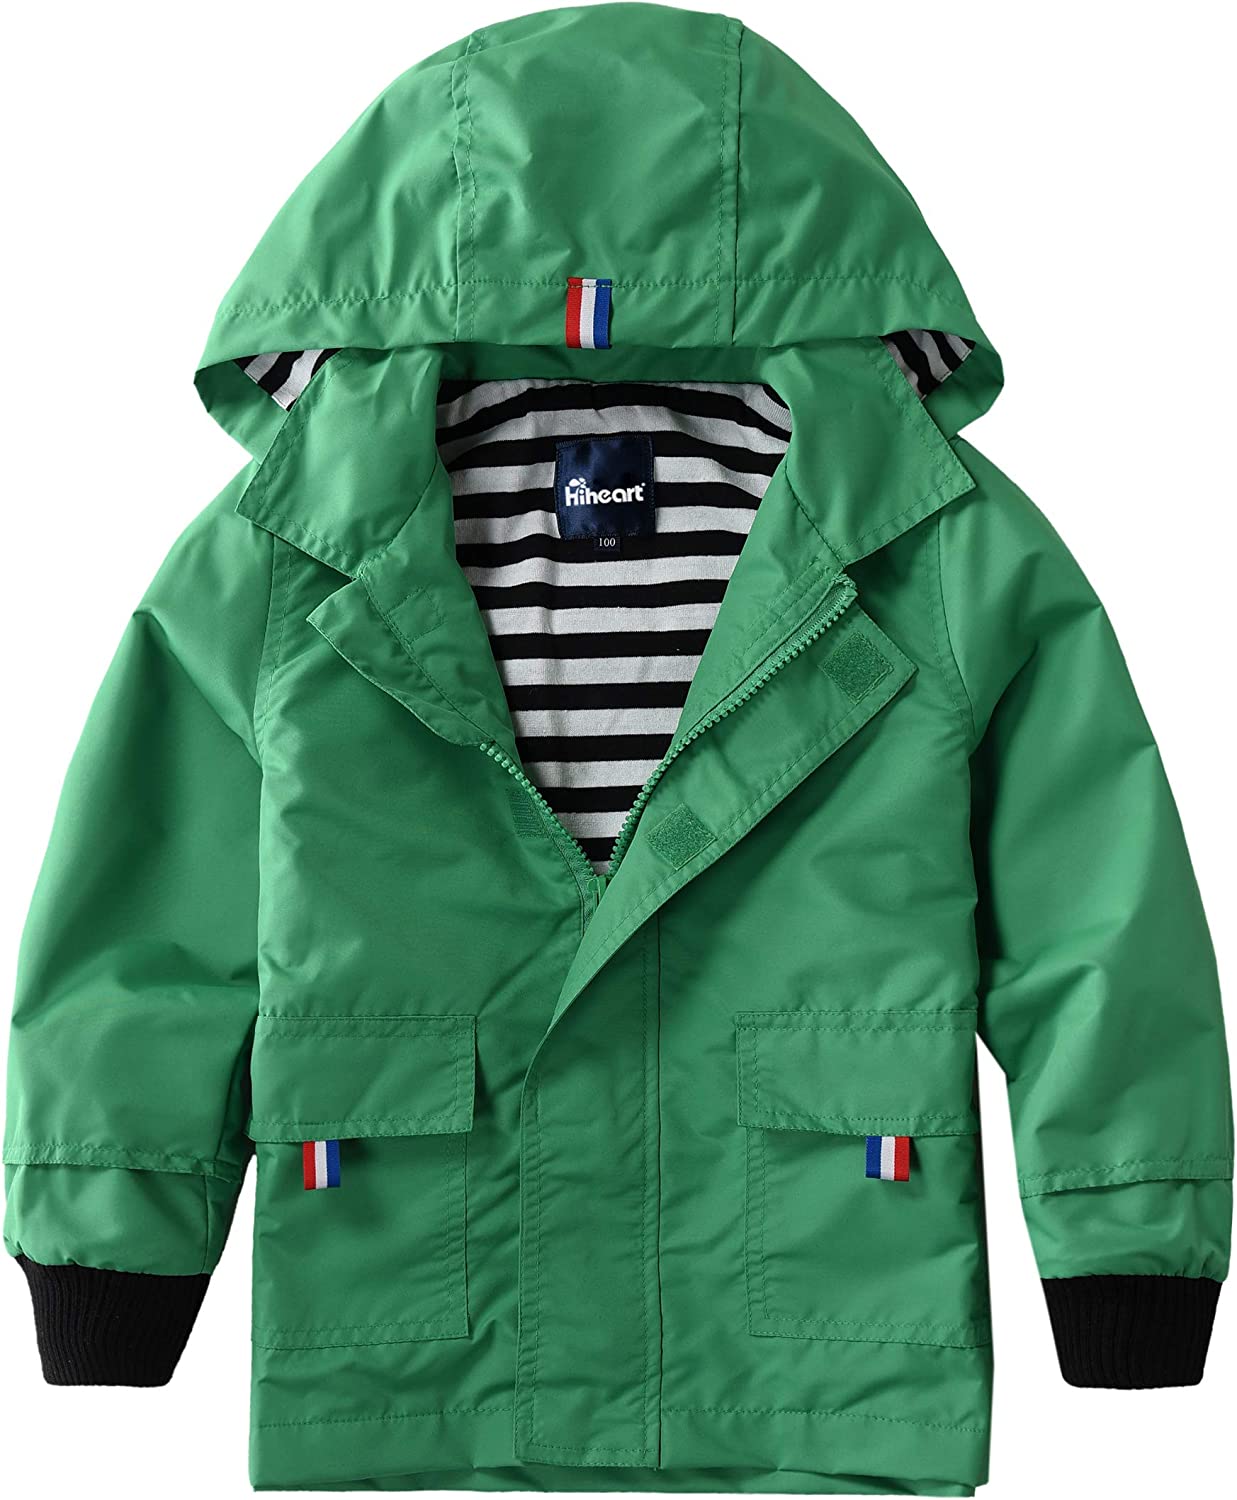 Hiheart Boys Zip-up Fleece Lined Cotton Padded Vest with Hood 